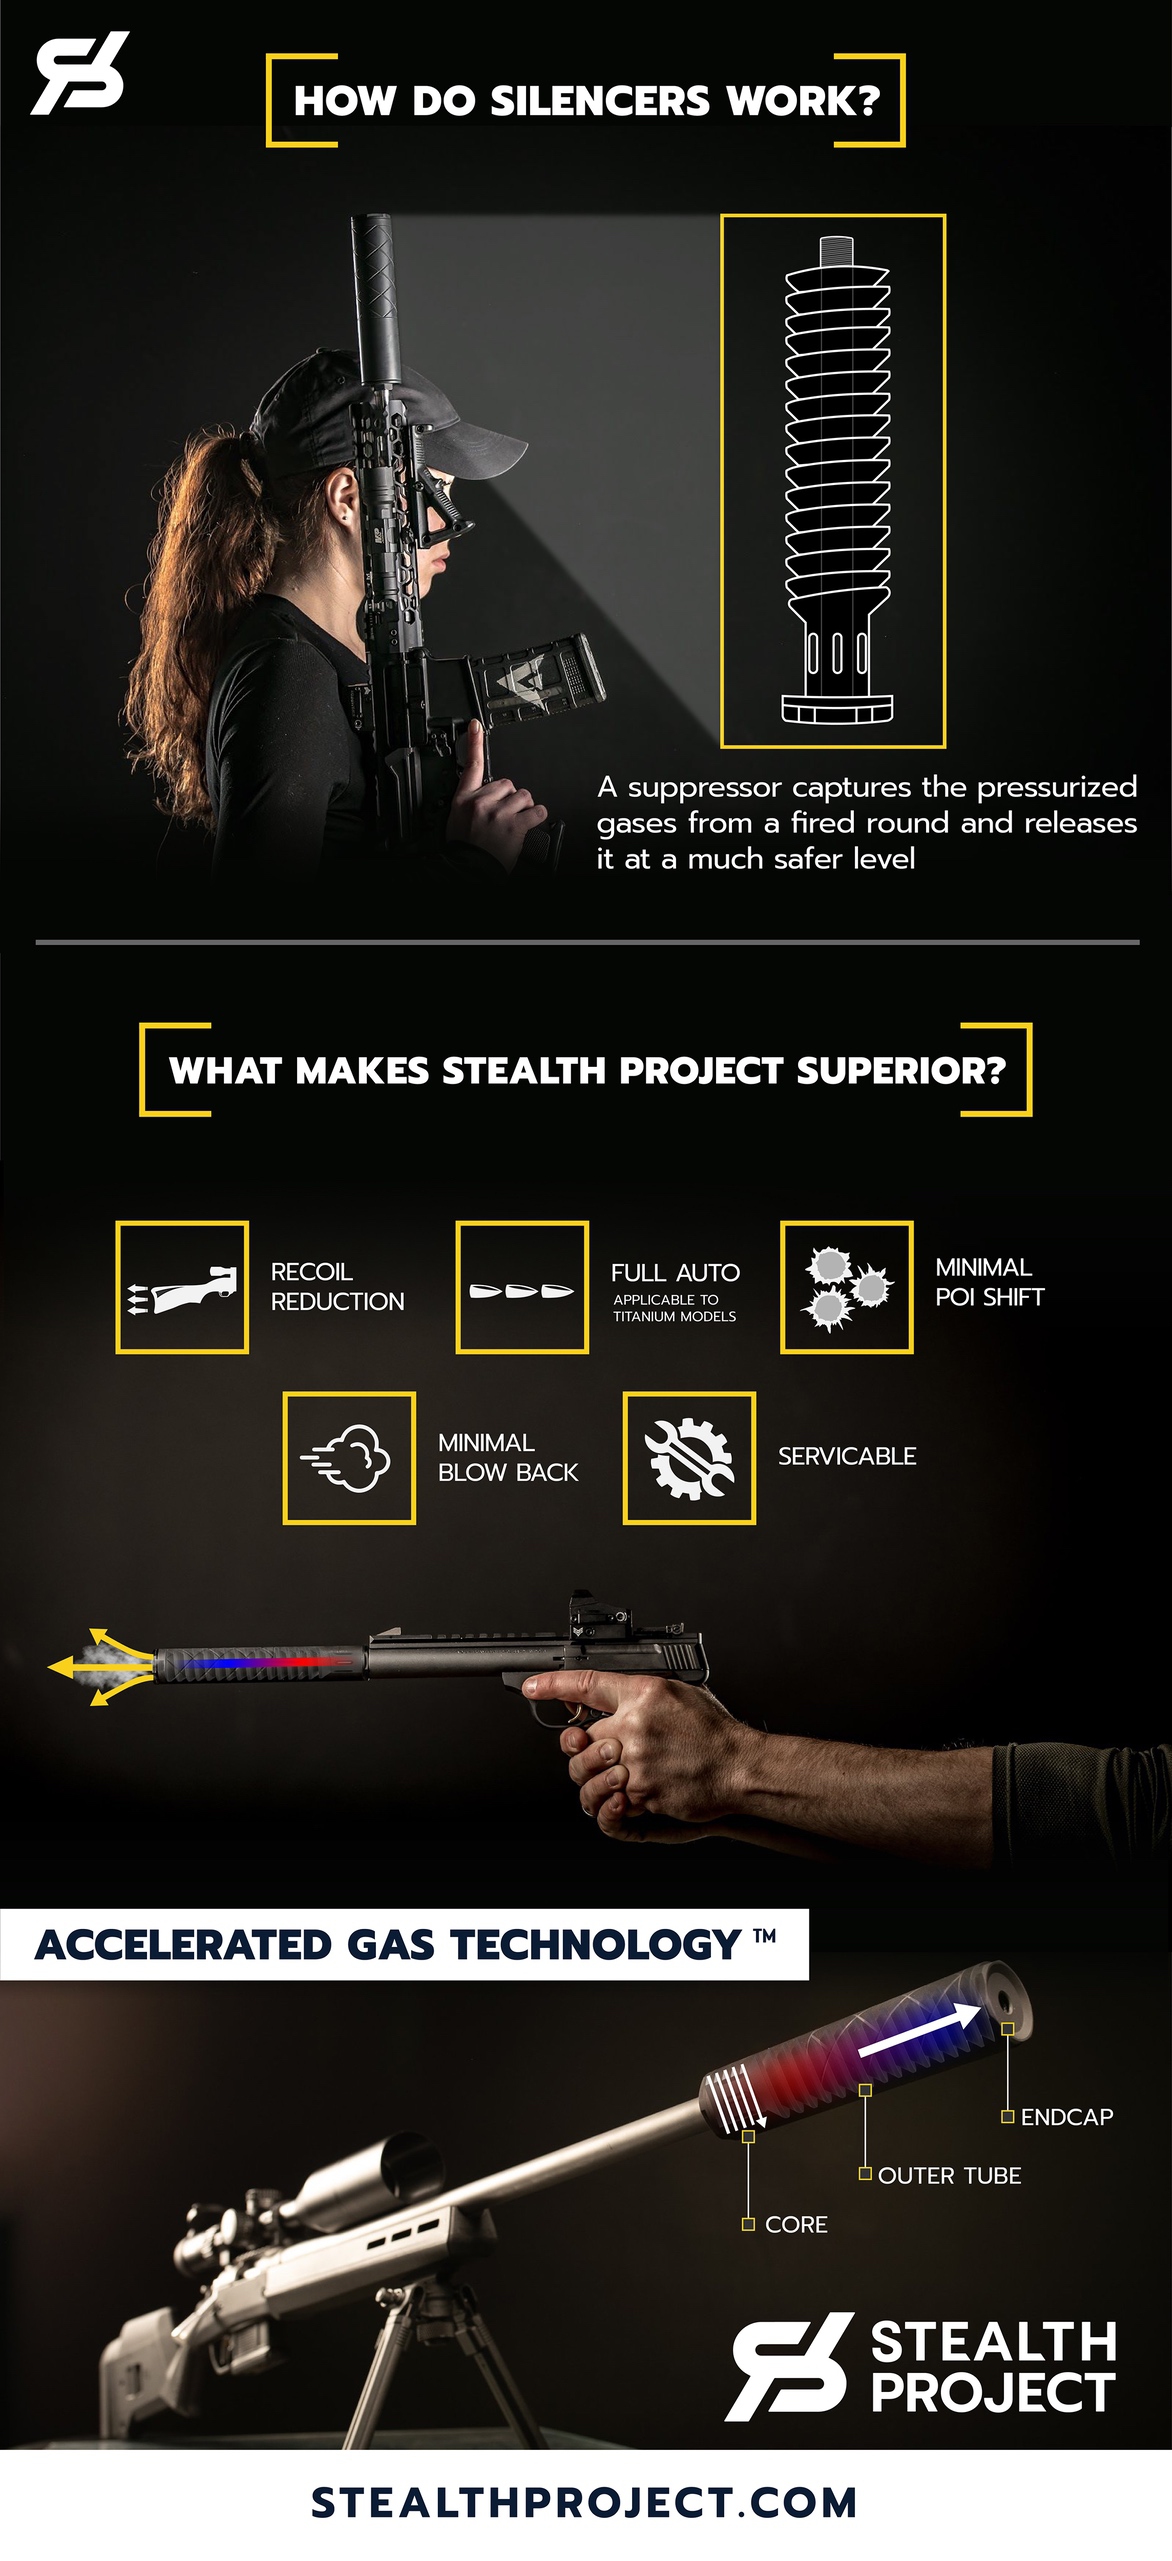 Stealth Project Suppressor Technology